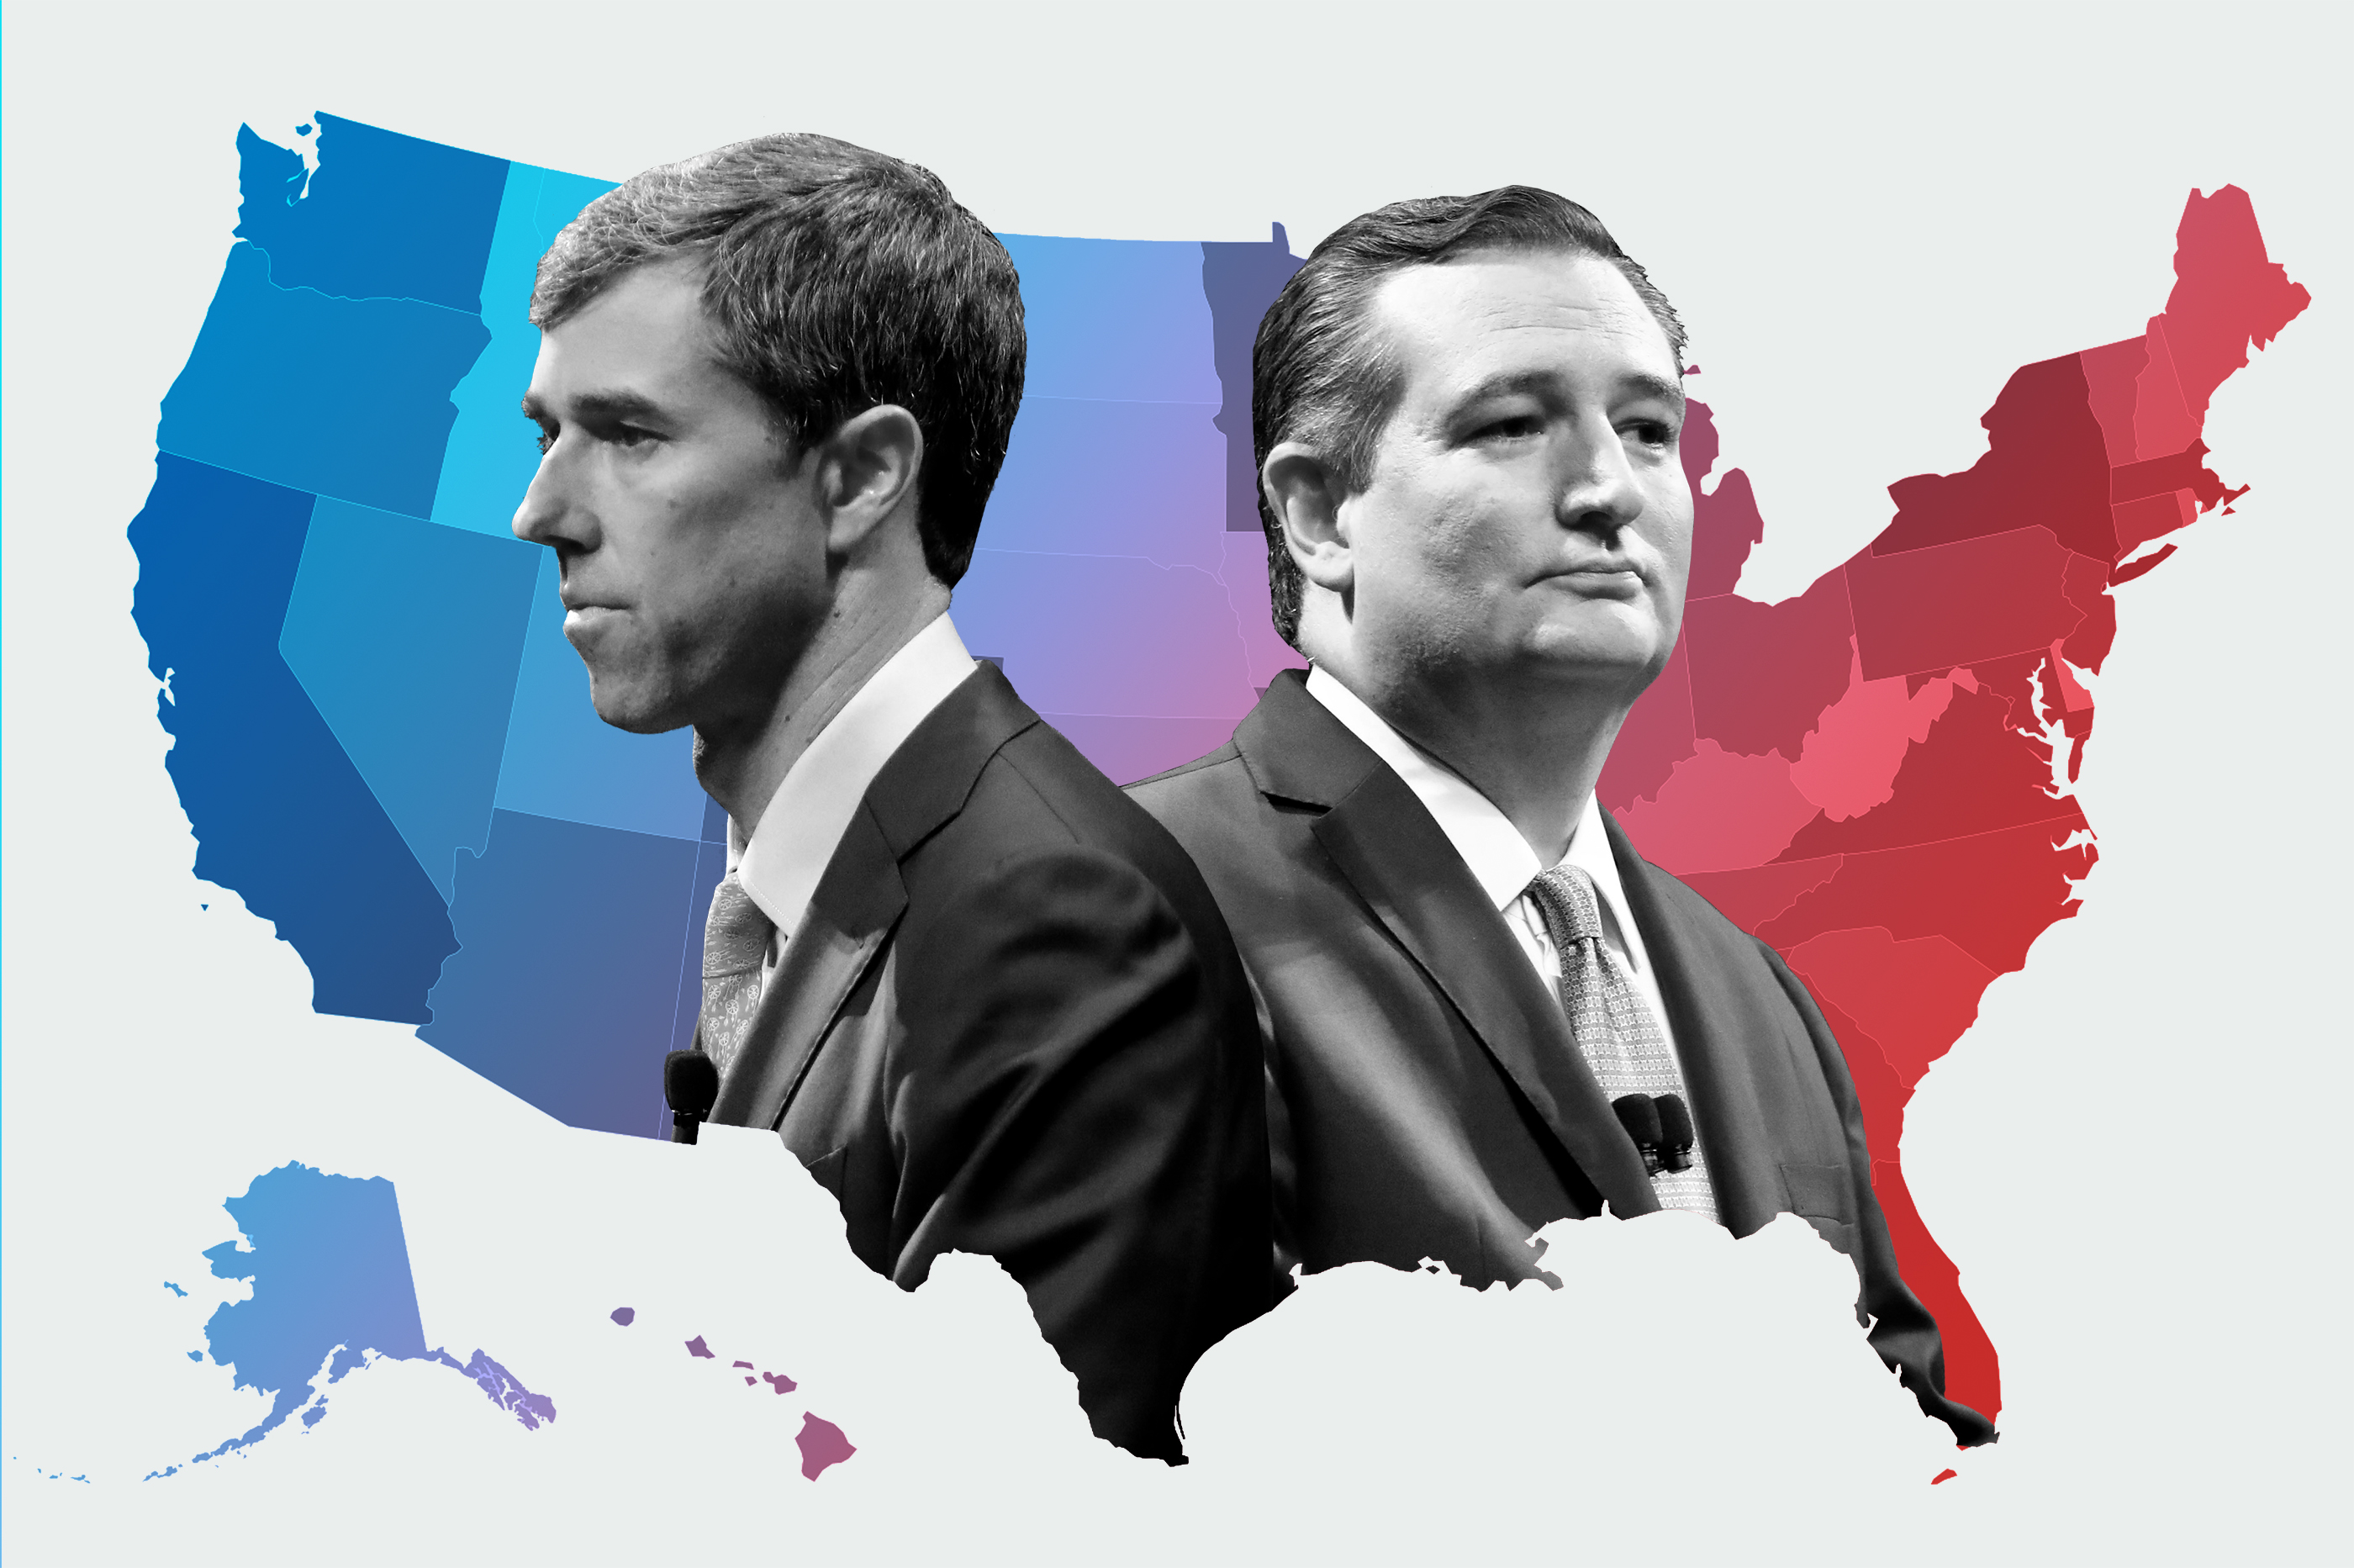 Beto O’Rourke Has Raised More Money Than Any Senate Candidate in U.S. History. This Map Shows Where the Donations Are Coming From